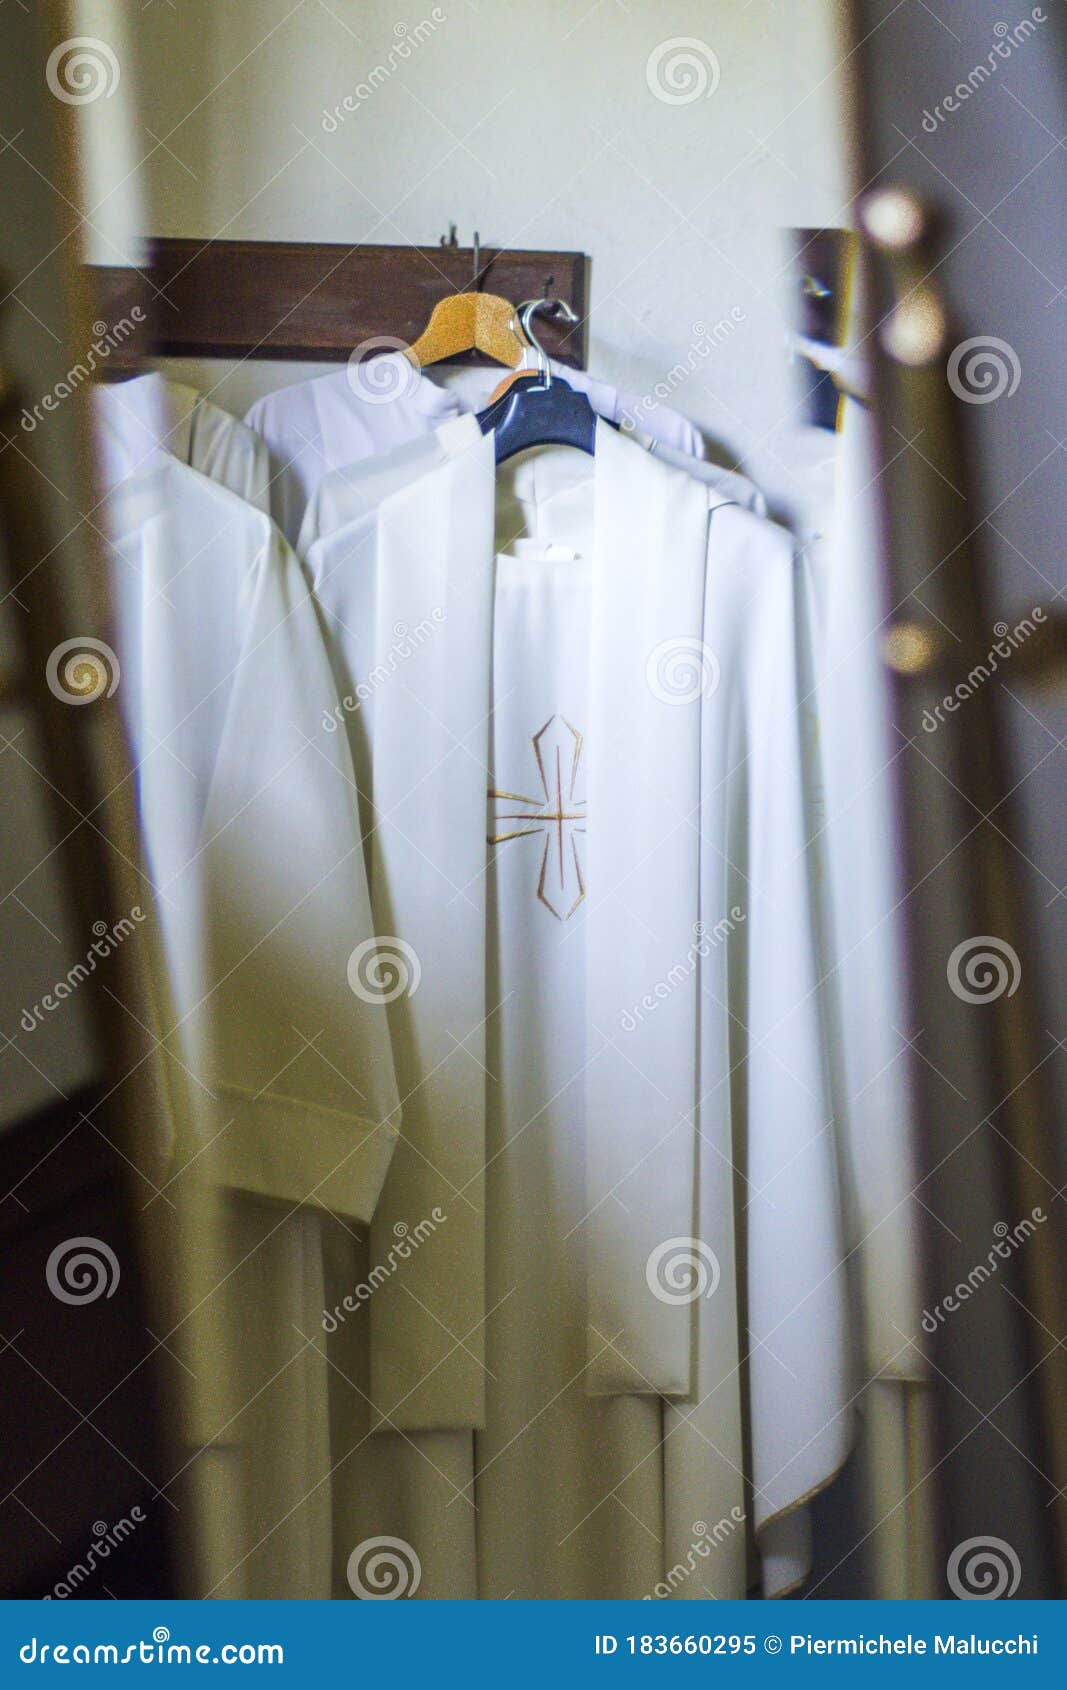 Clothing and Vestments of the Priest for the Holy Mass Stock Image ...